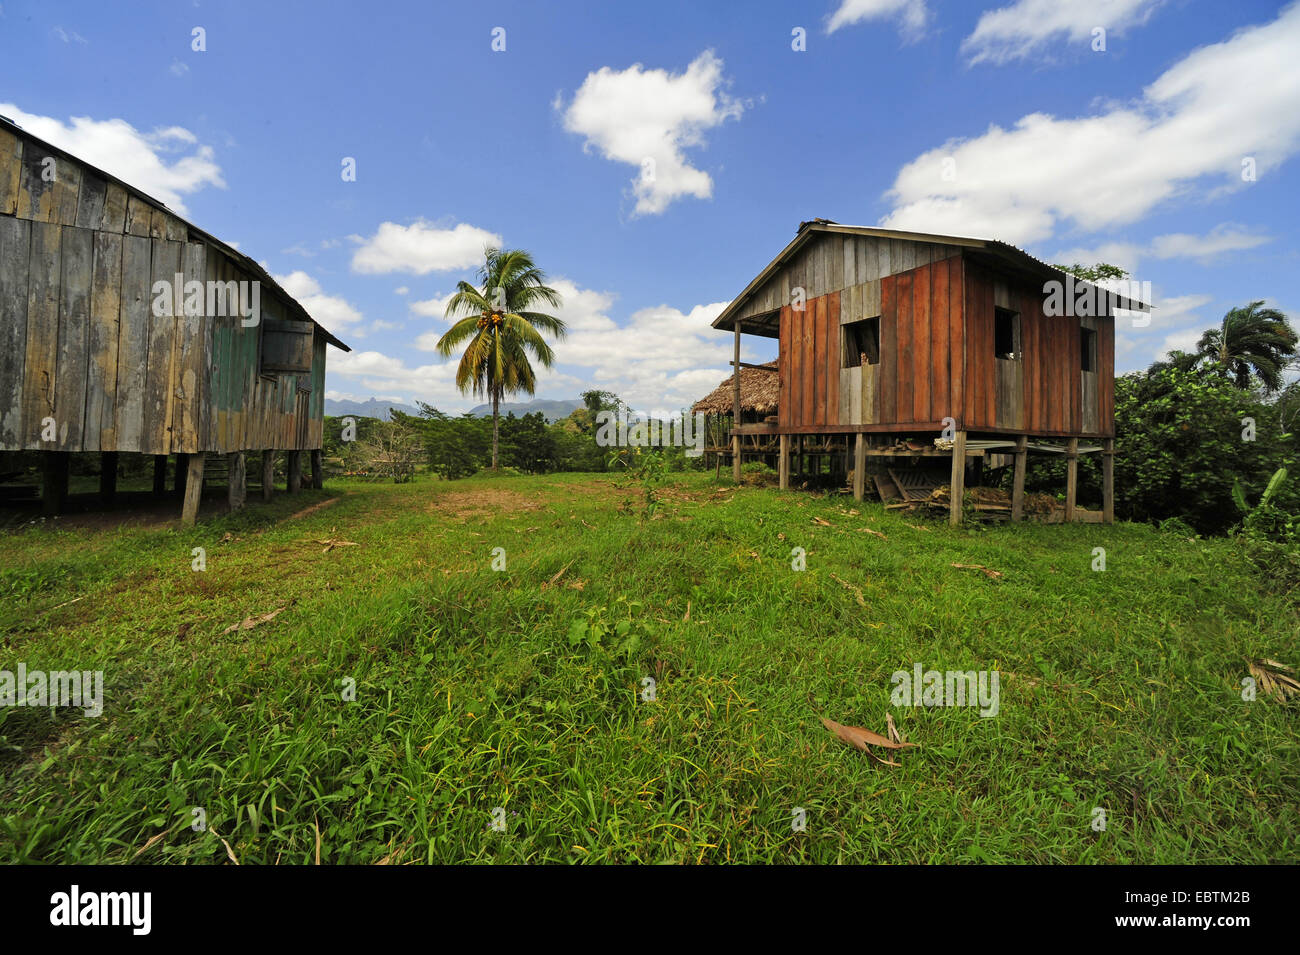 two little houses wooden standing in a meadow, Honduras, La Mosquitia, Las Marias Stock Photo